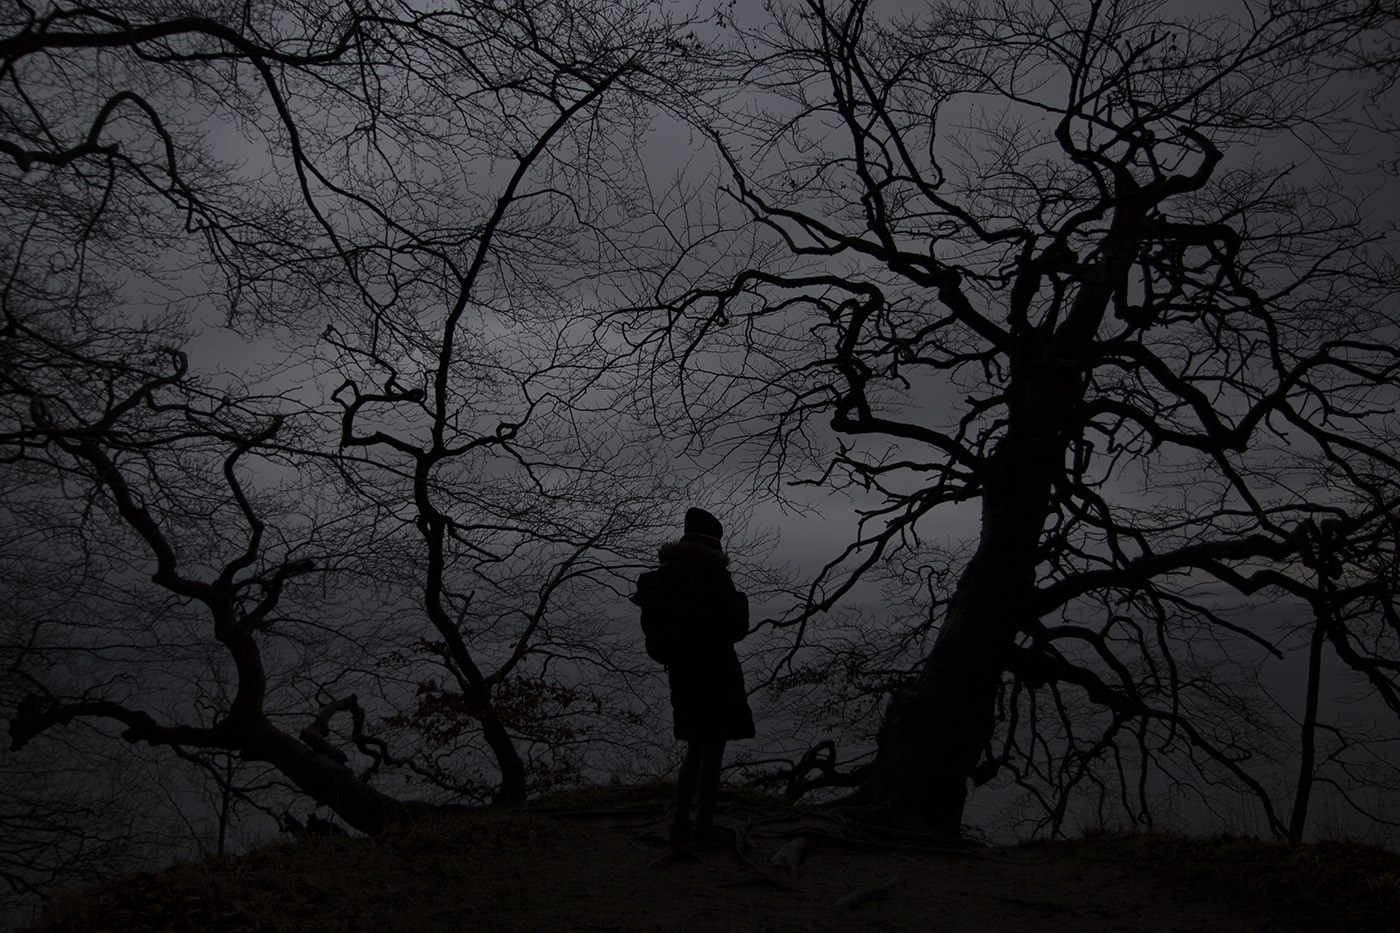 A person is seen in silhouette in front of dark clouds and trees with no leaves